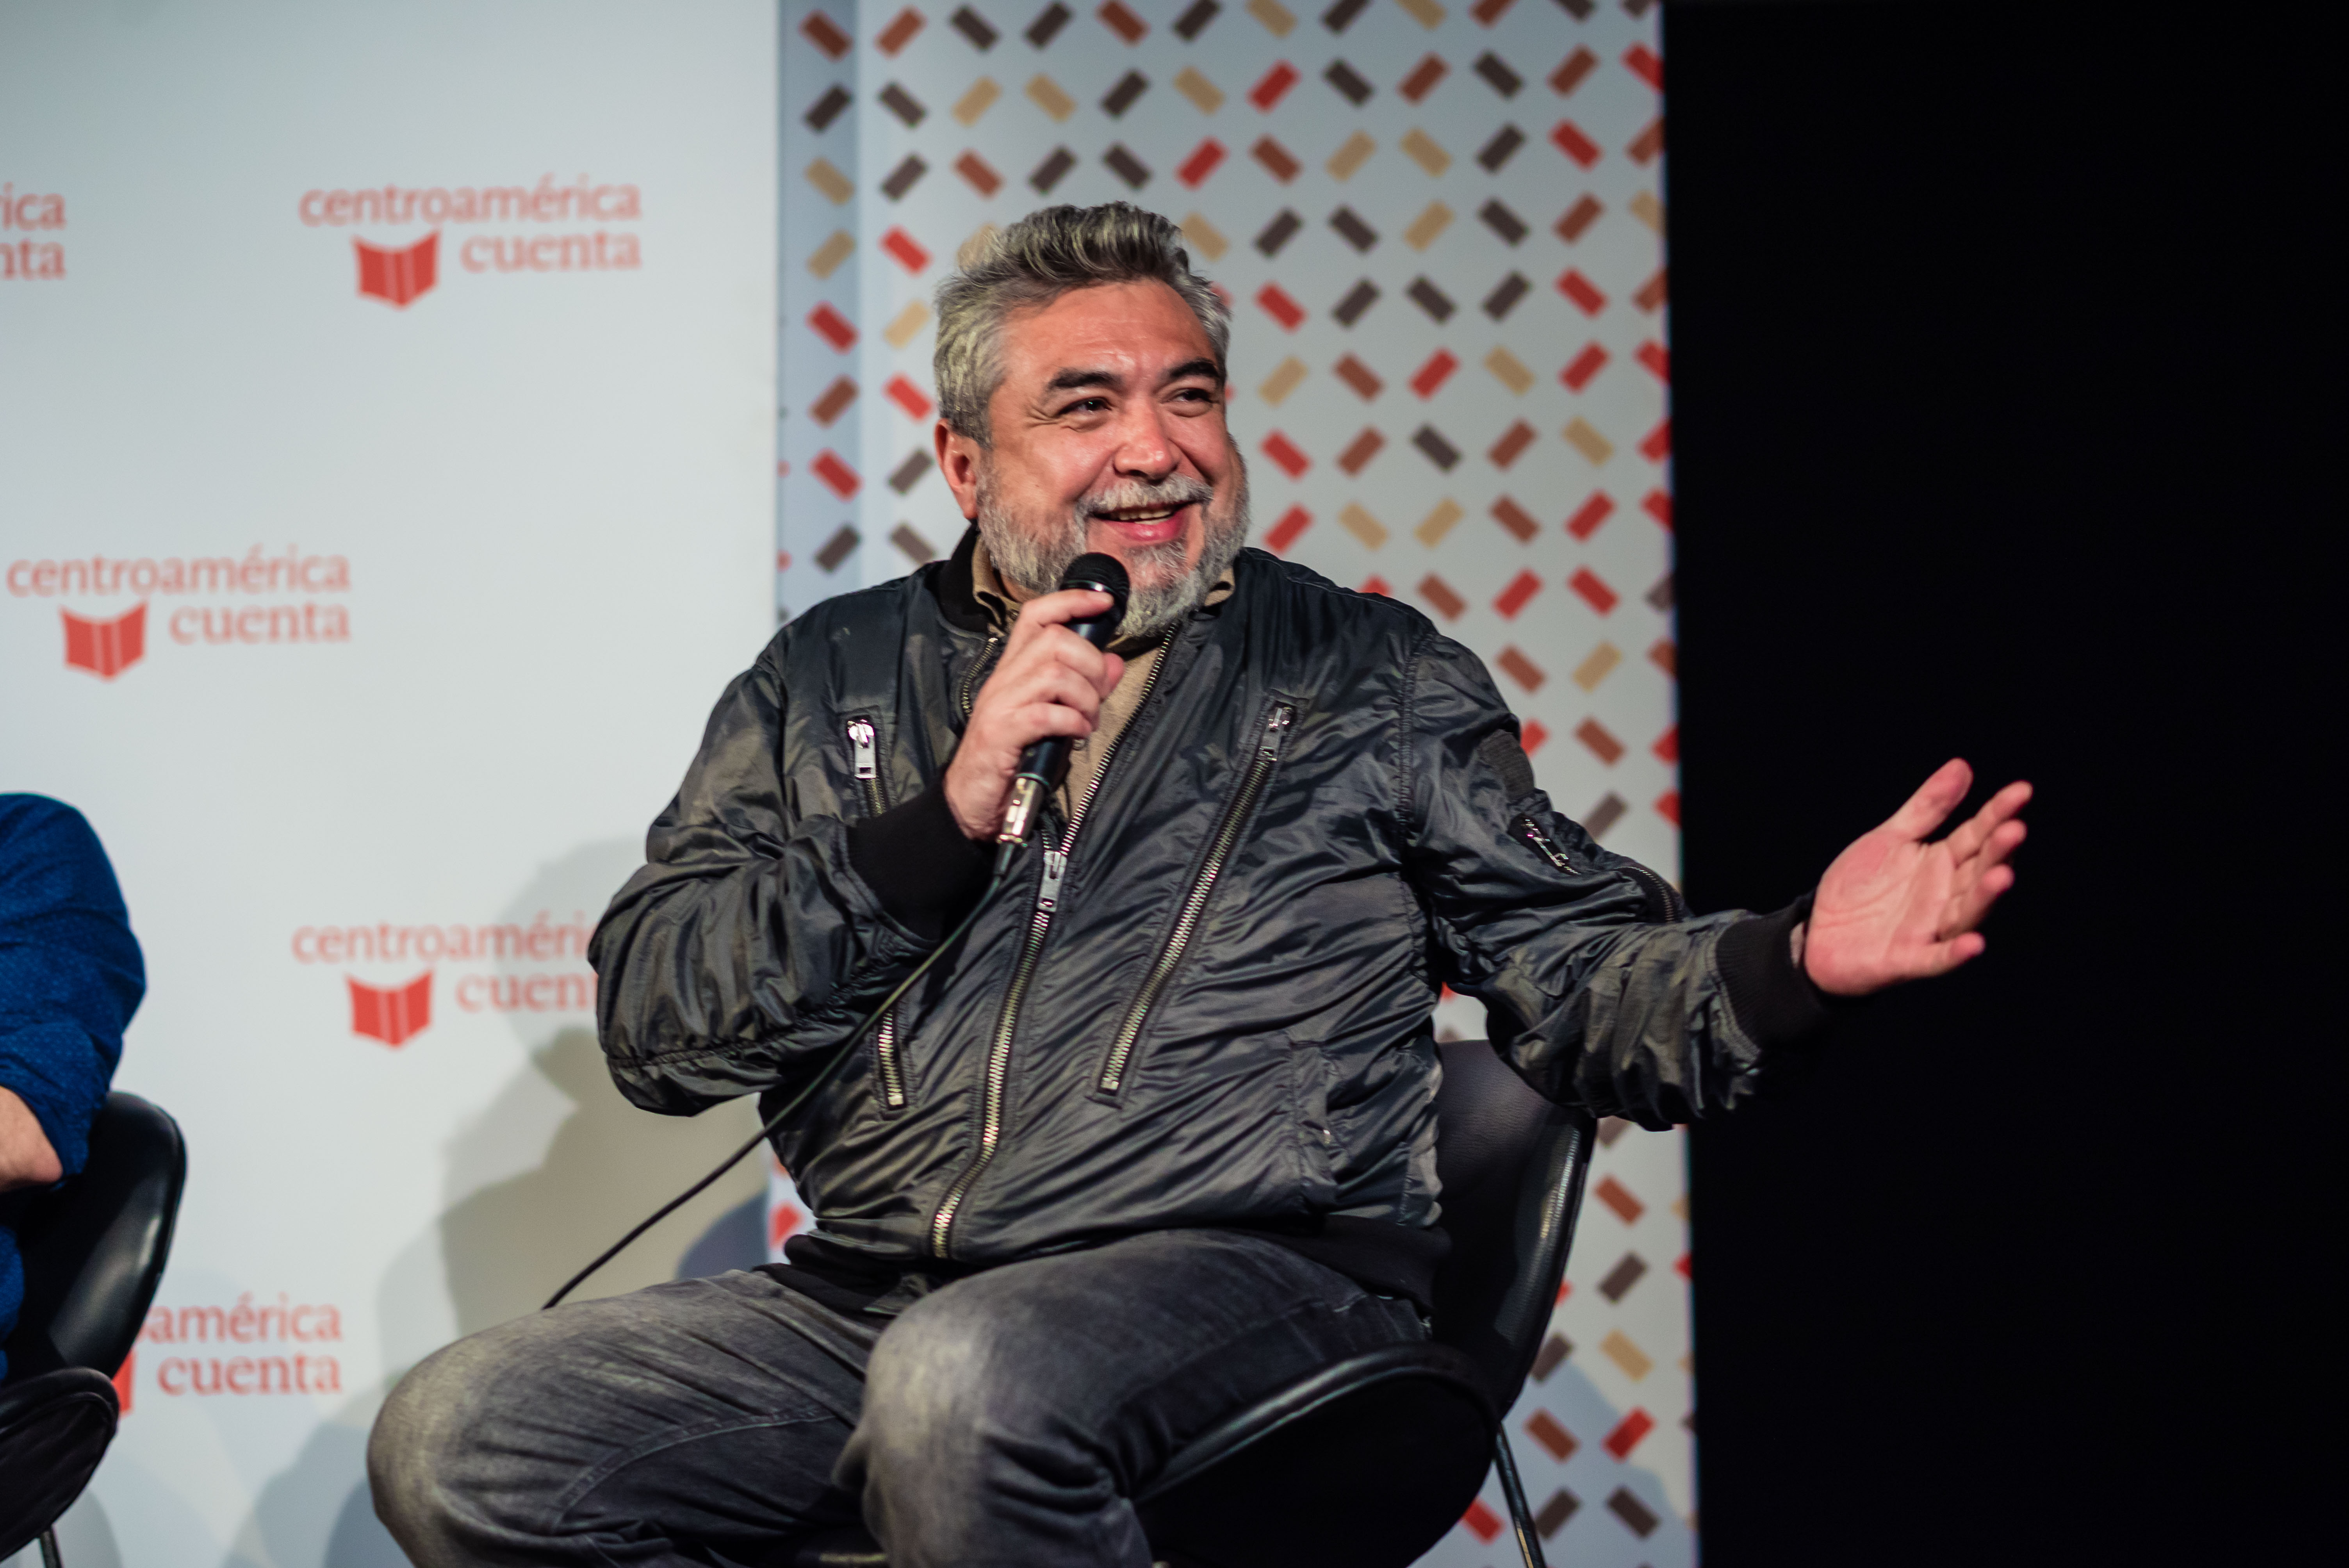 Cristian Alarcón, the latest winner of the Alfaguara Award, was among the guests at the festival.